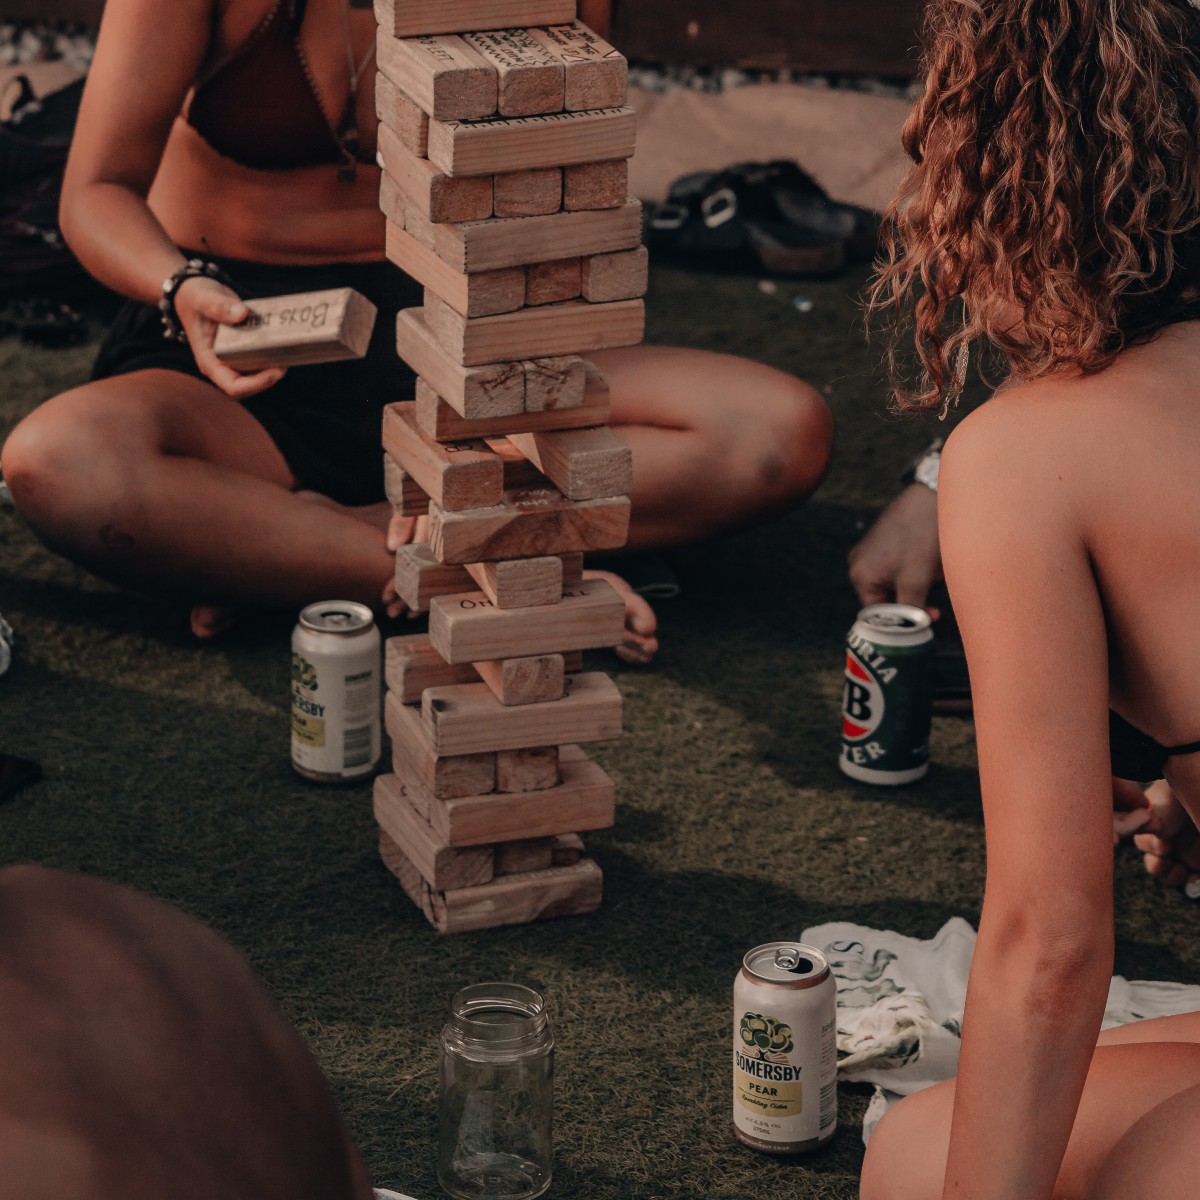 Aussie girls playing jenga drinking VB (the leges)